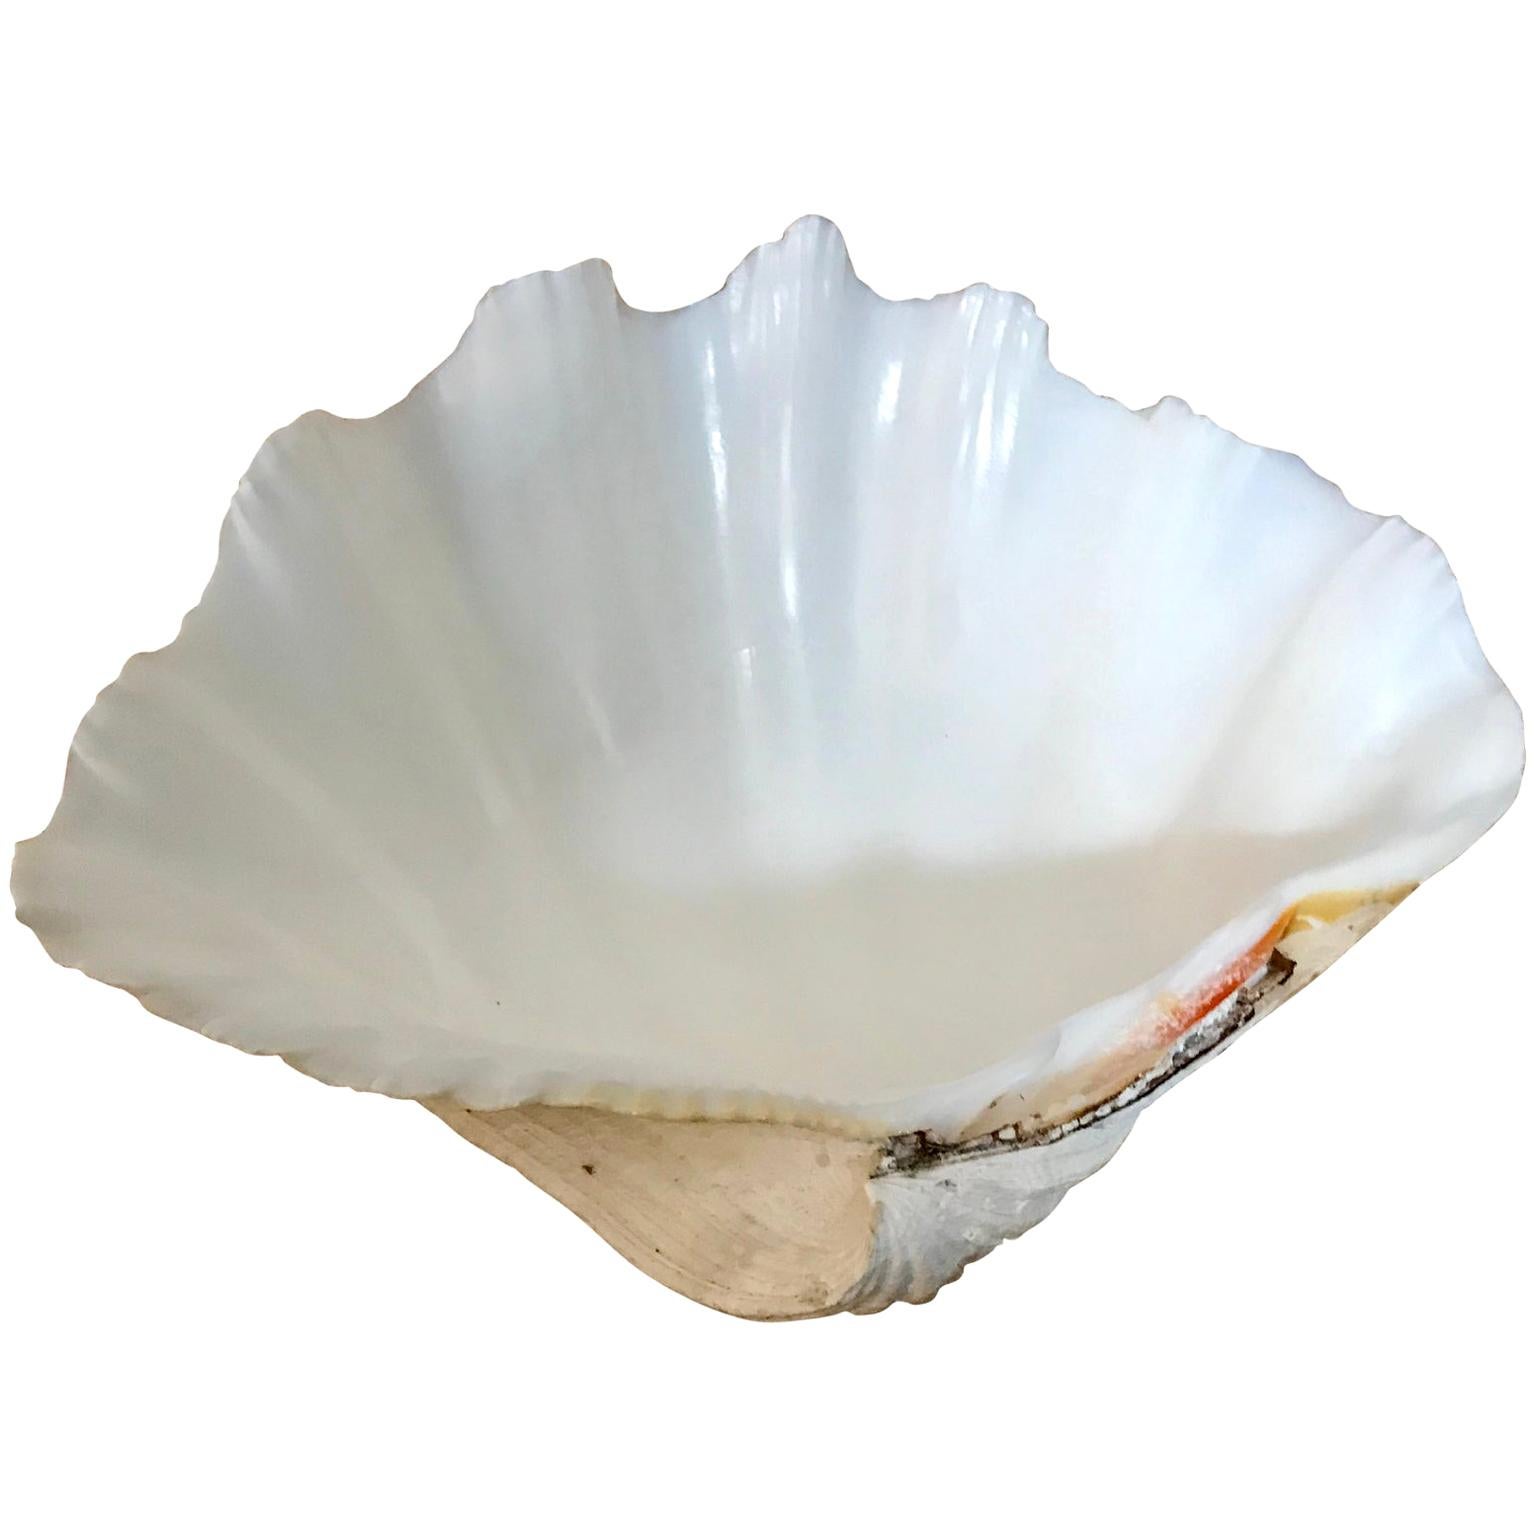 Small South Pacific Tridacna Gigas Clam Trinket For Sale